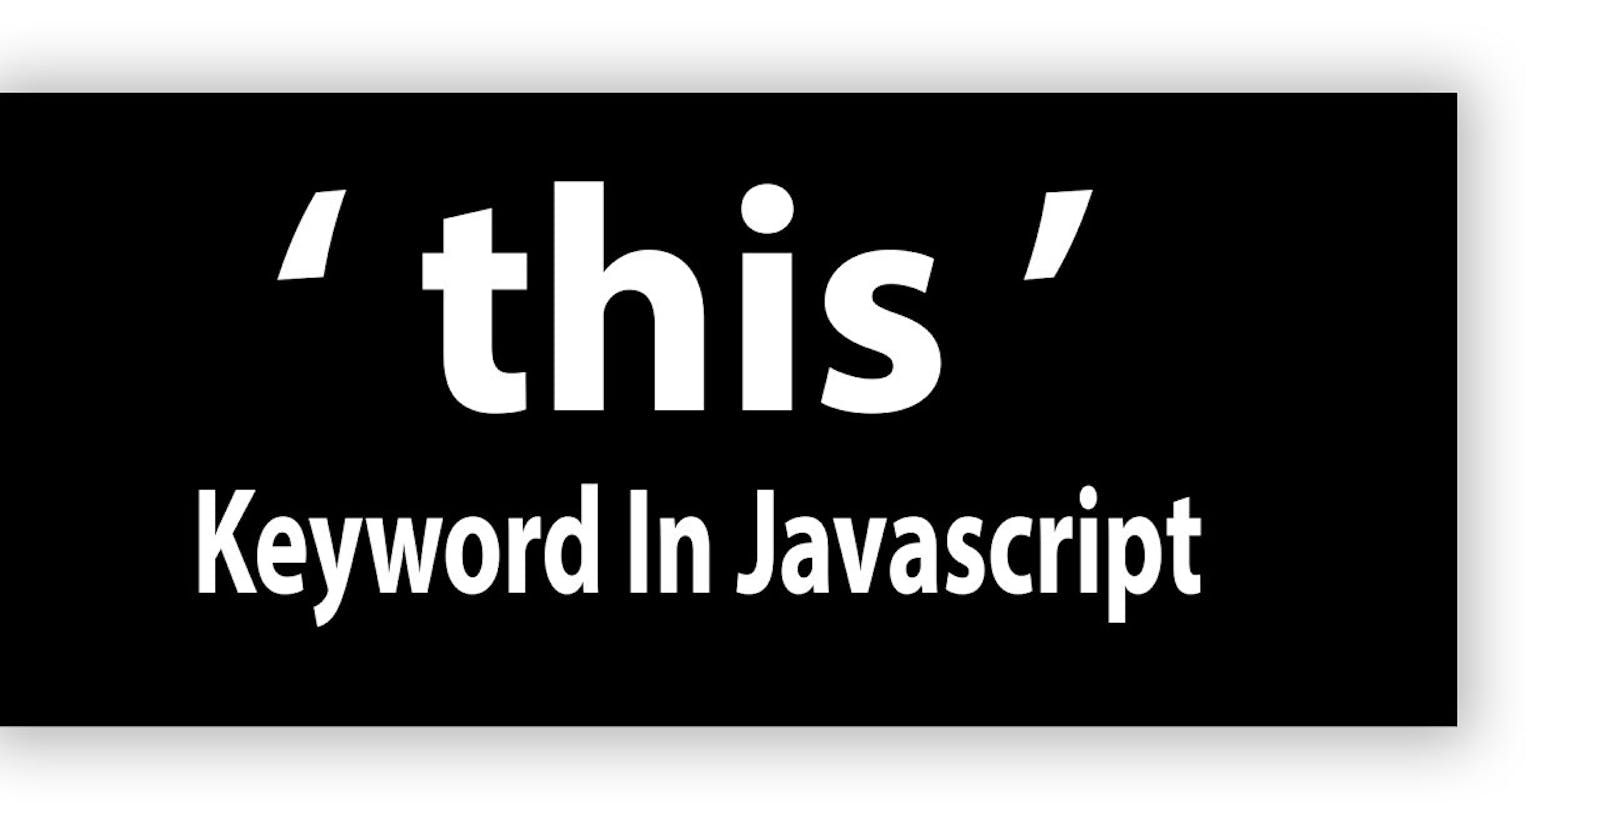 How i got to understand the "this" keyword in JavaScript